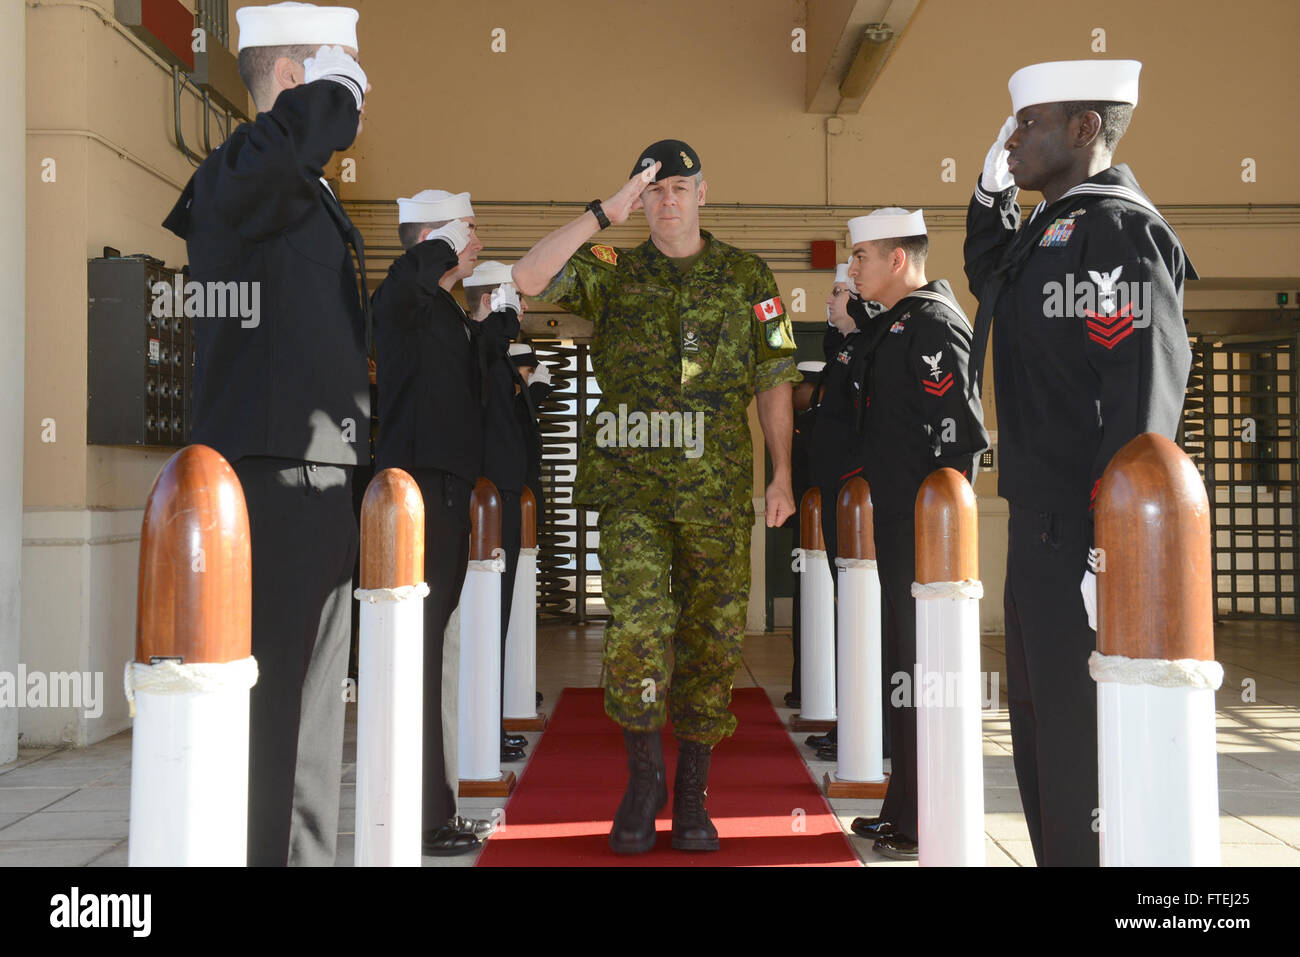 NAPLES, Italy (Oct. 30, 2014) Canadian Army Lt. Gen. Michael Day, Joint Force Command Naples deputy commander, passes through sideboys as he is welcomed to Commander, U.S. Naval Forces Europe-Africa/Commander, U.S. 6th Fleet (NAVEUR-NAVAF/C6F) headquarters. NAVEUR-NAVAF/C6F, headquartered in Naples, Italy, conducts the full spectrum of joint and naval operations, often in concert with allied, joint, and interagency partners, in order to advance U.S. national interests and security and stability in Europe and Africa. (Photo by Mass Communication Specialist 3rd Class Daniel Sc Stock Photo